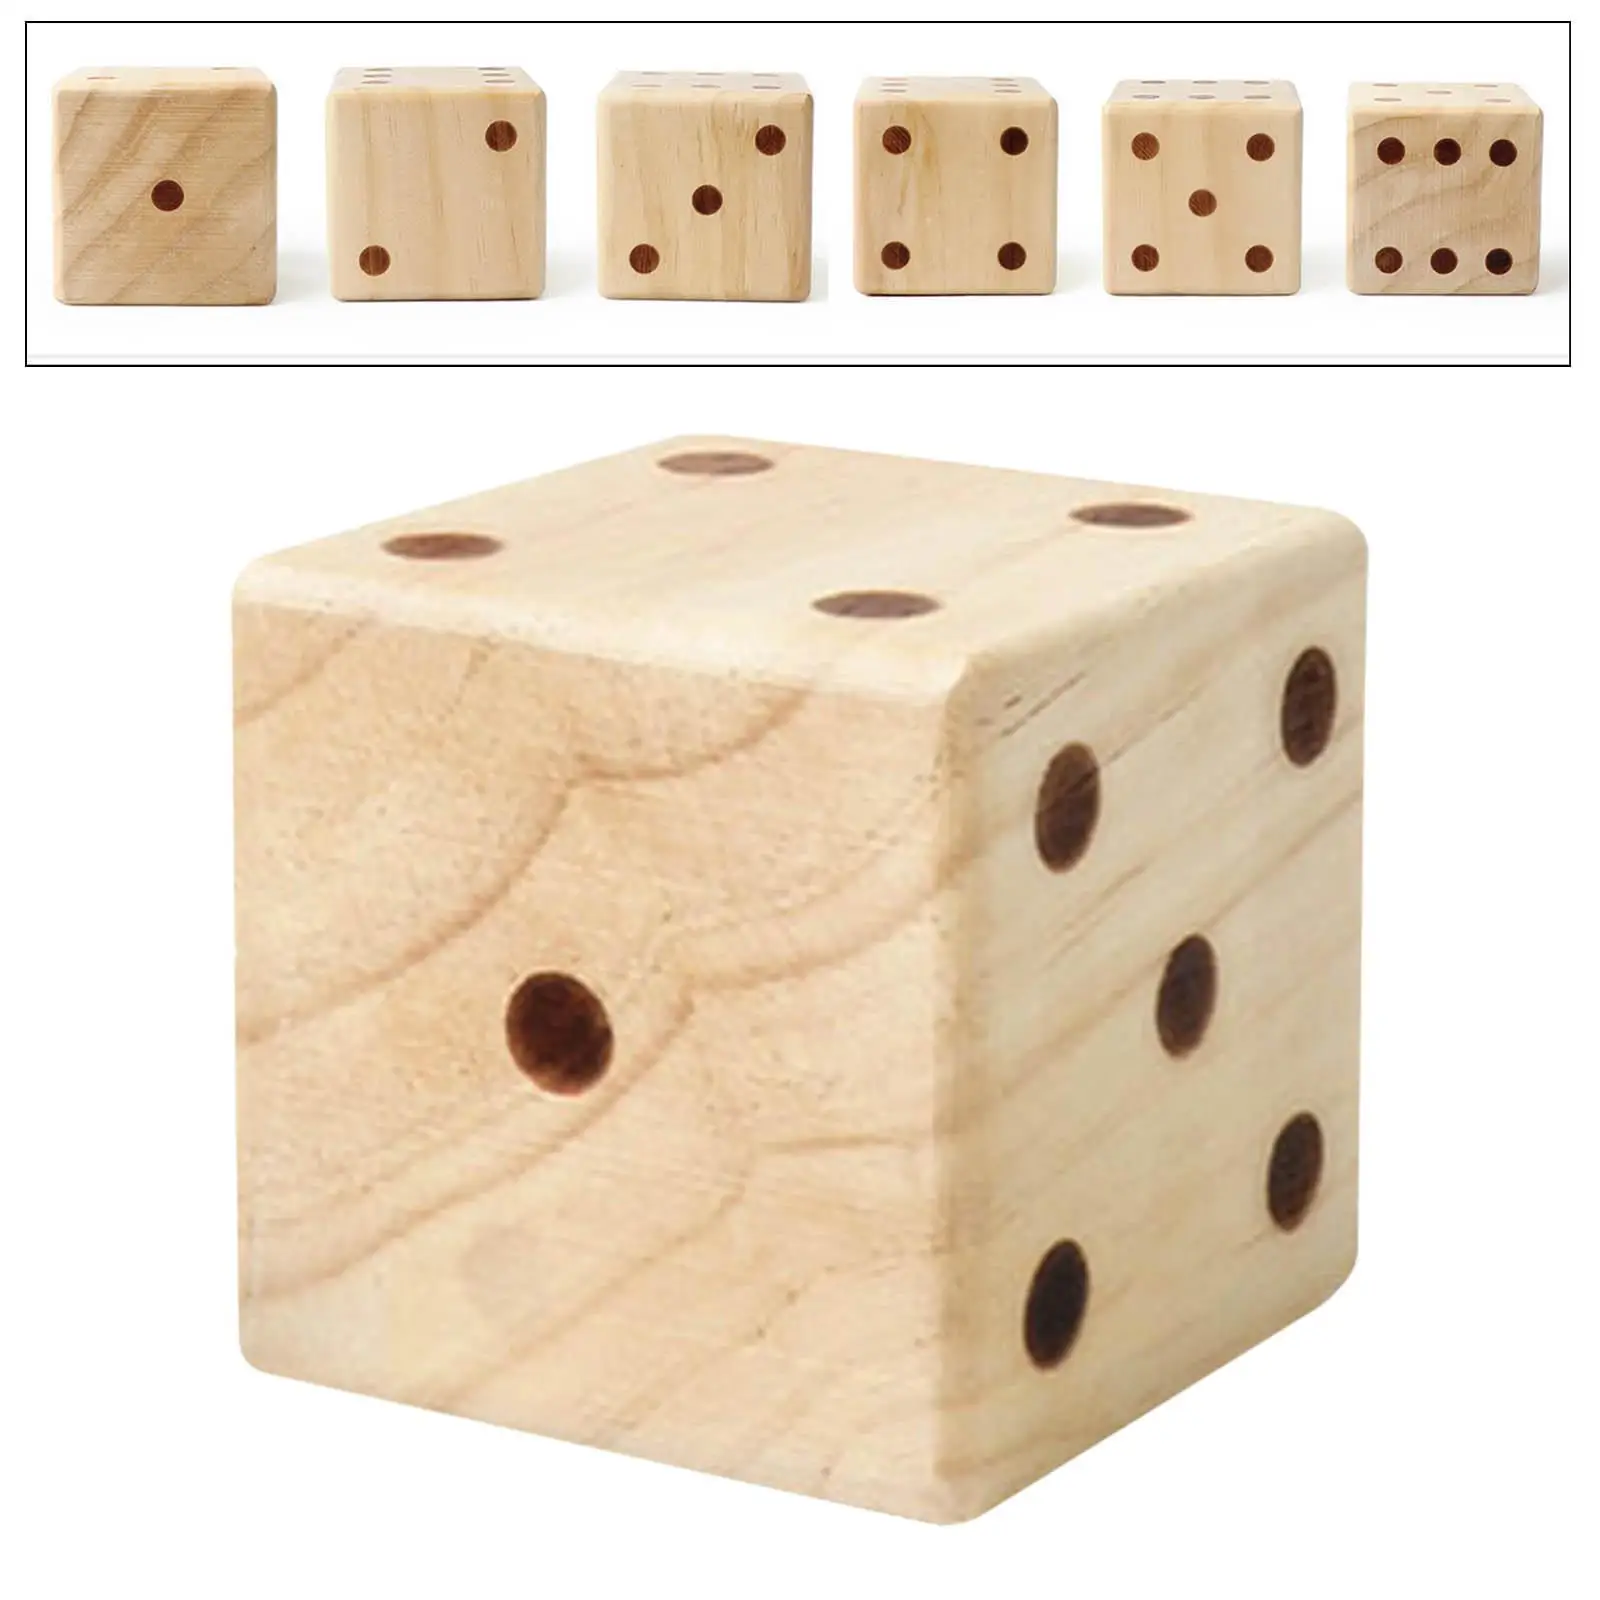 Large Wooden Yard Dice 7cm Lightweight for Game Sports Equipment Lawn Kids Family